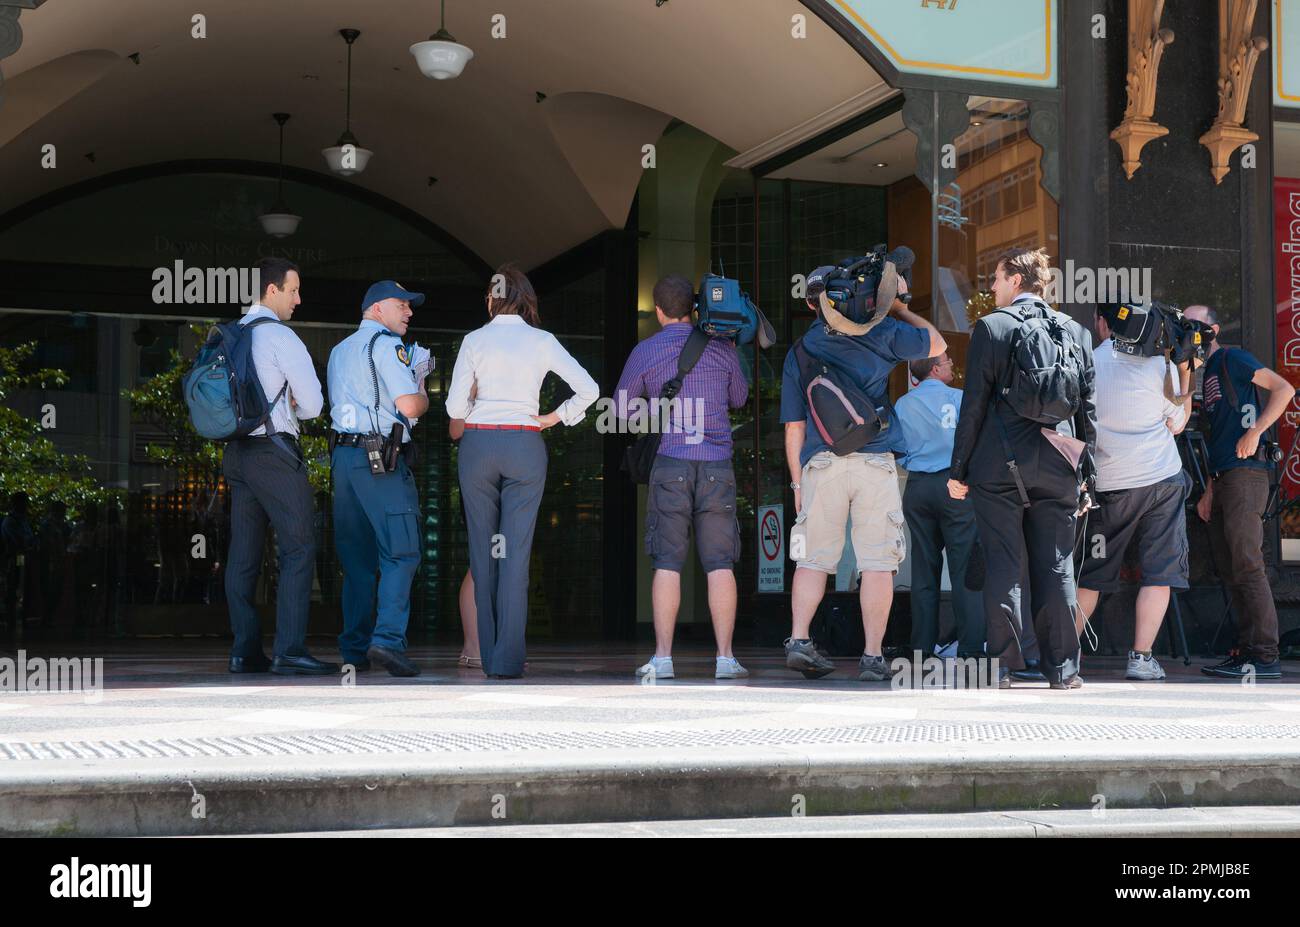 Sydney Australia - January 26 2011; Cameramen,journalists and police waiting for trial personnel on top step outside courthouse. Stock Photo